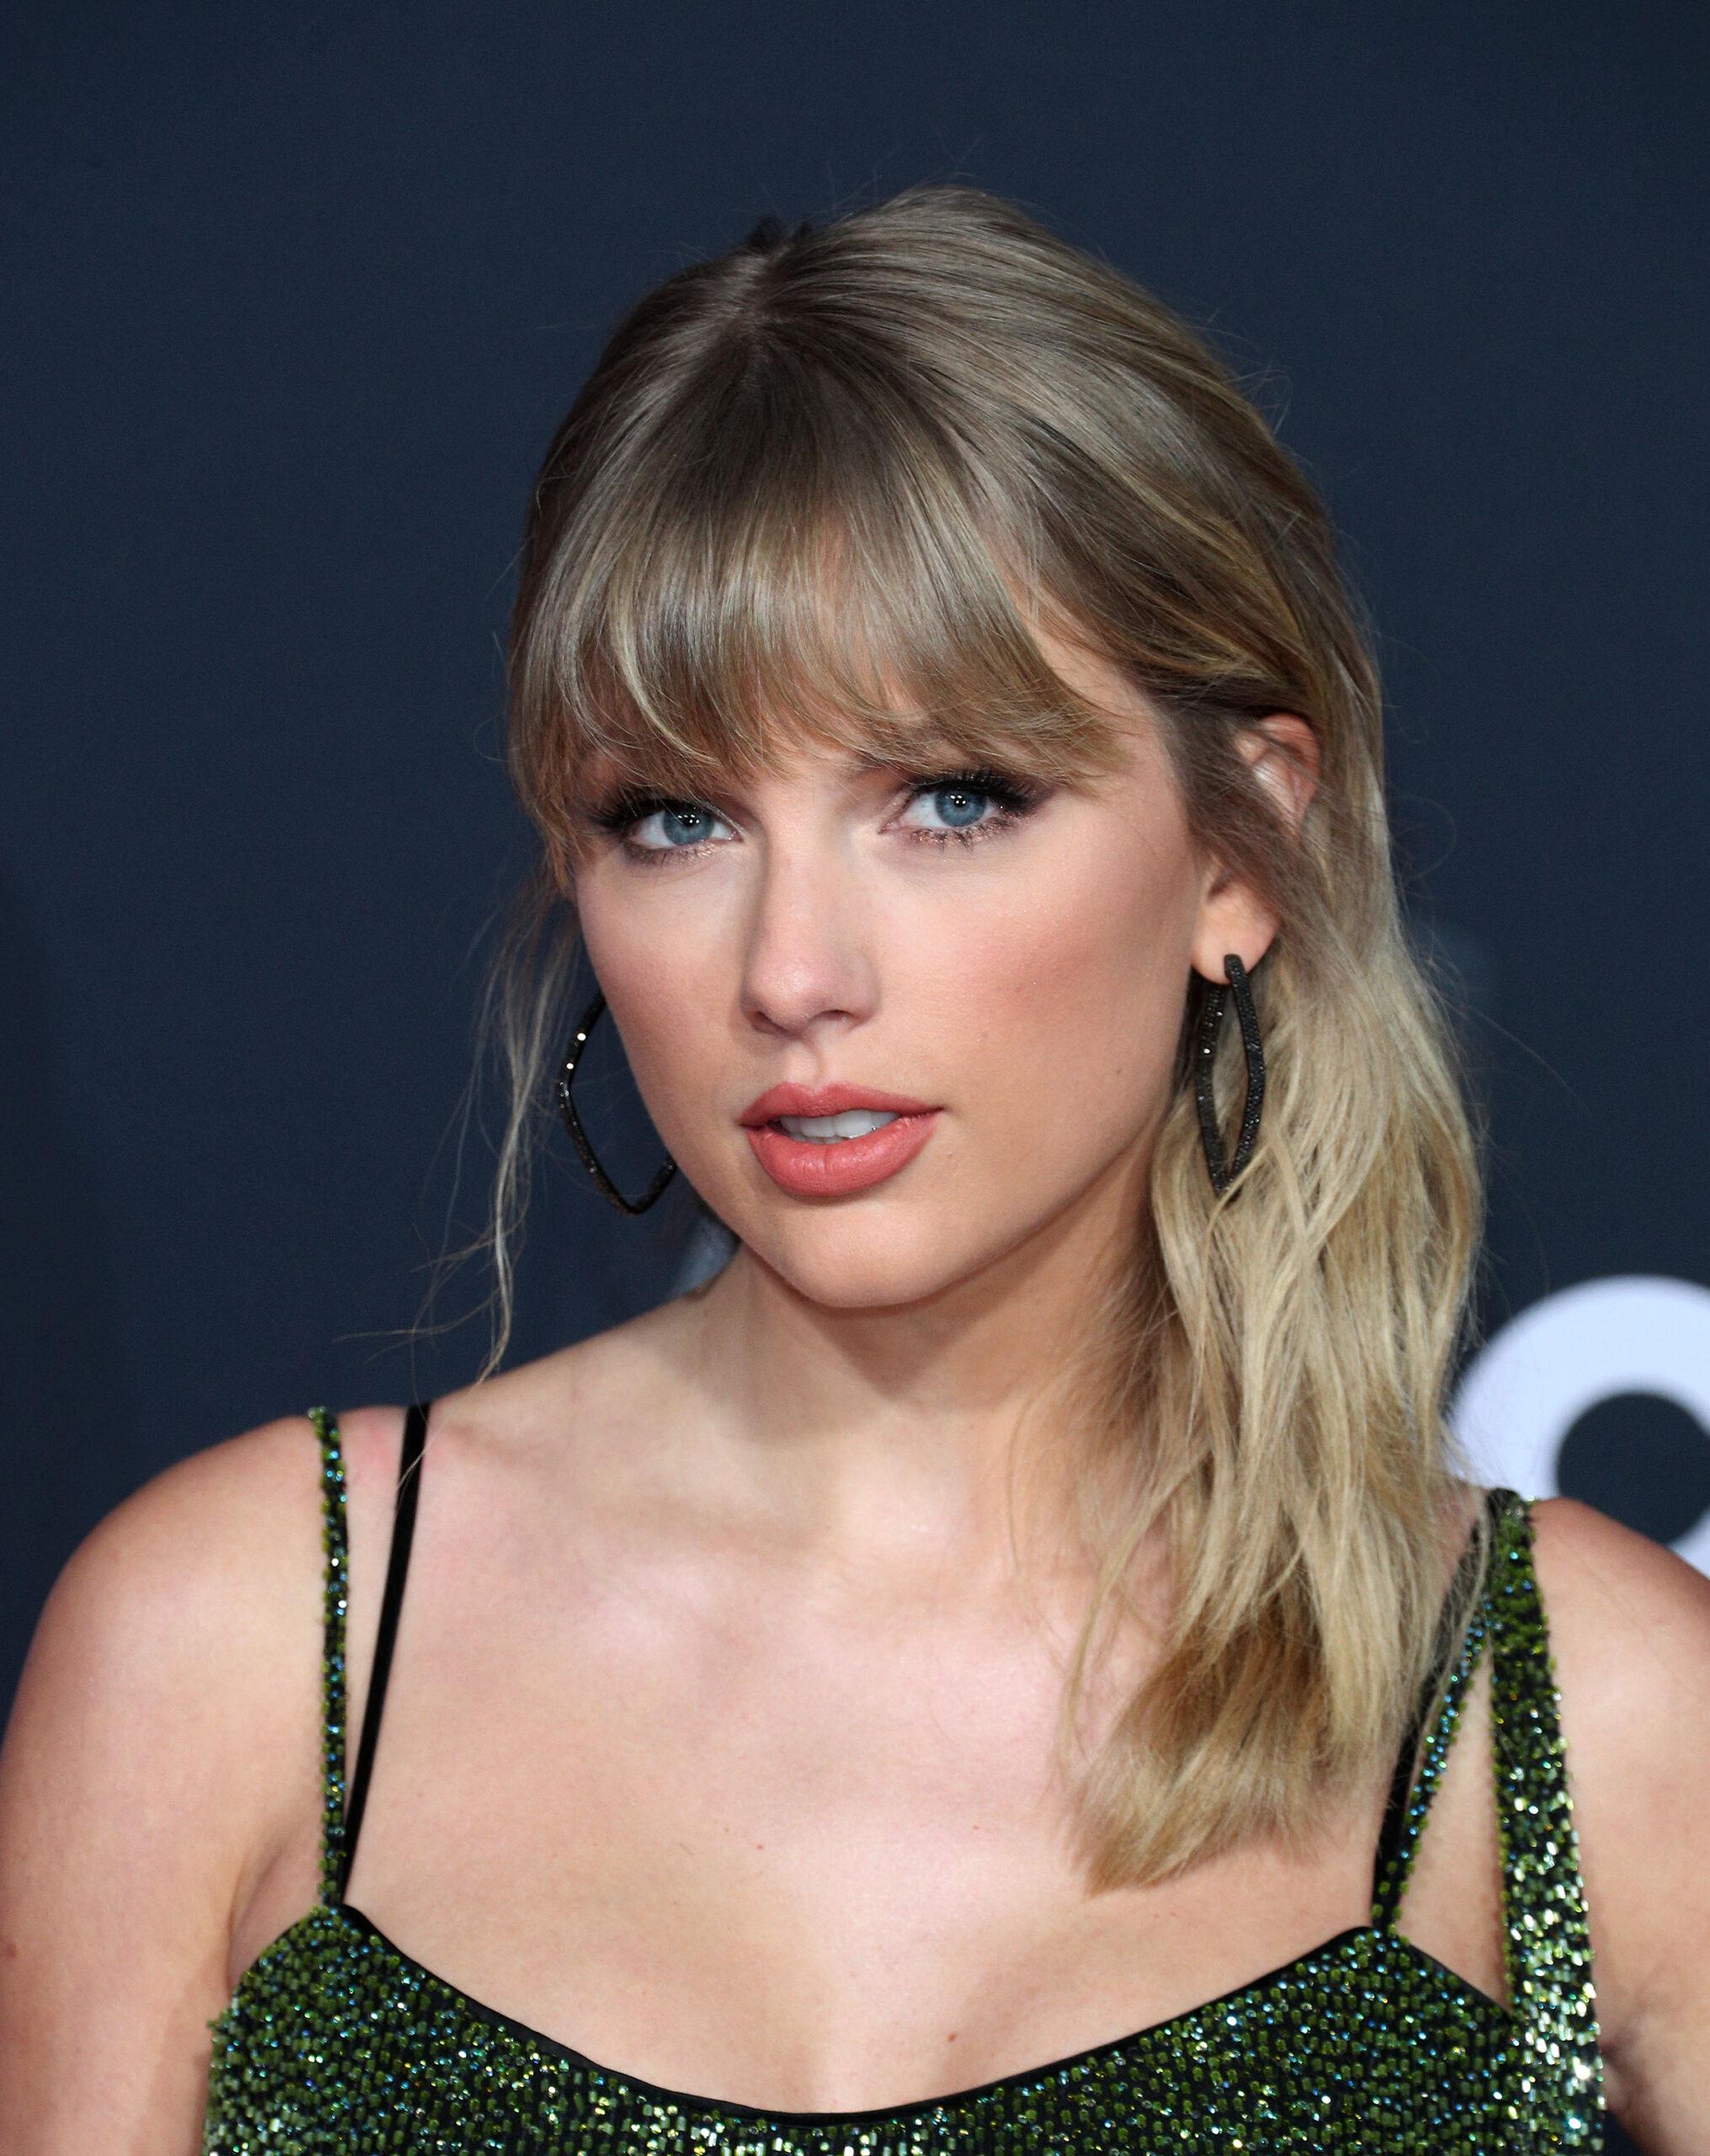 Taylor Swift's Massive Earnings From Spotify Revealed